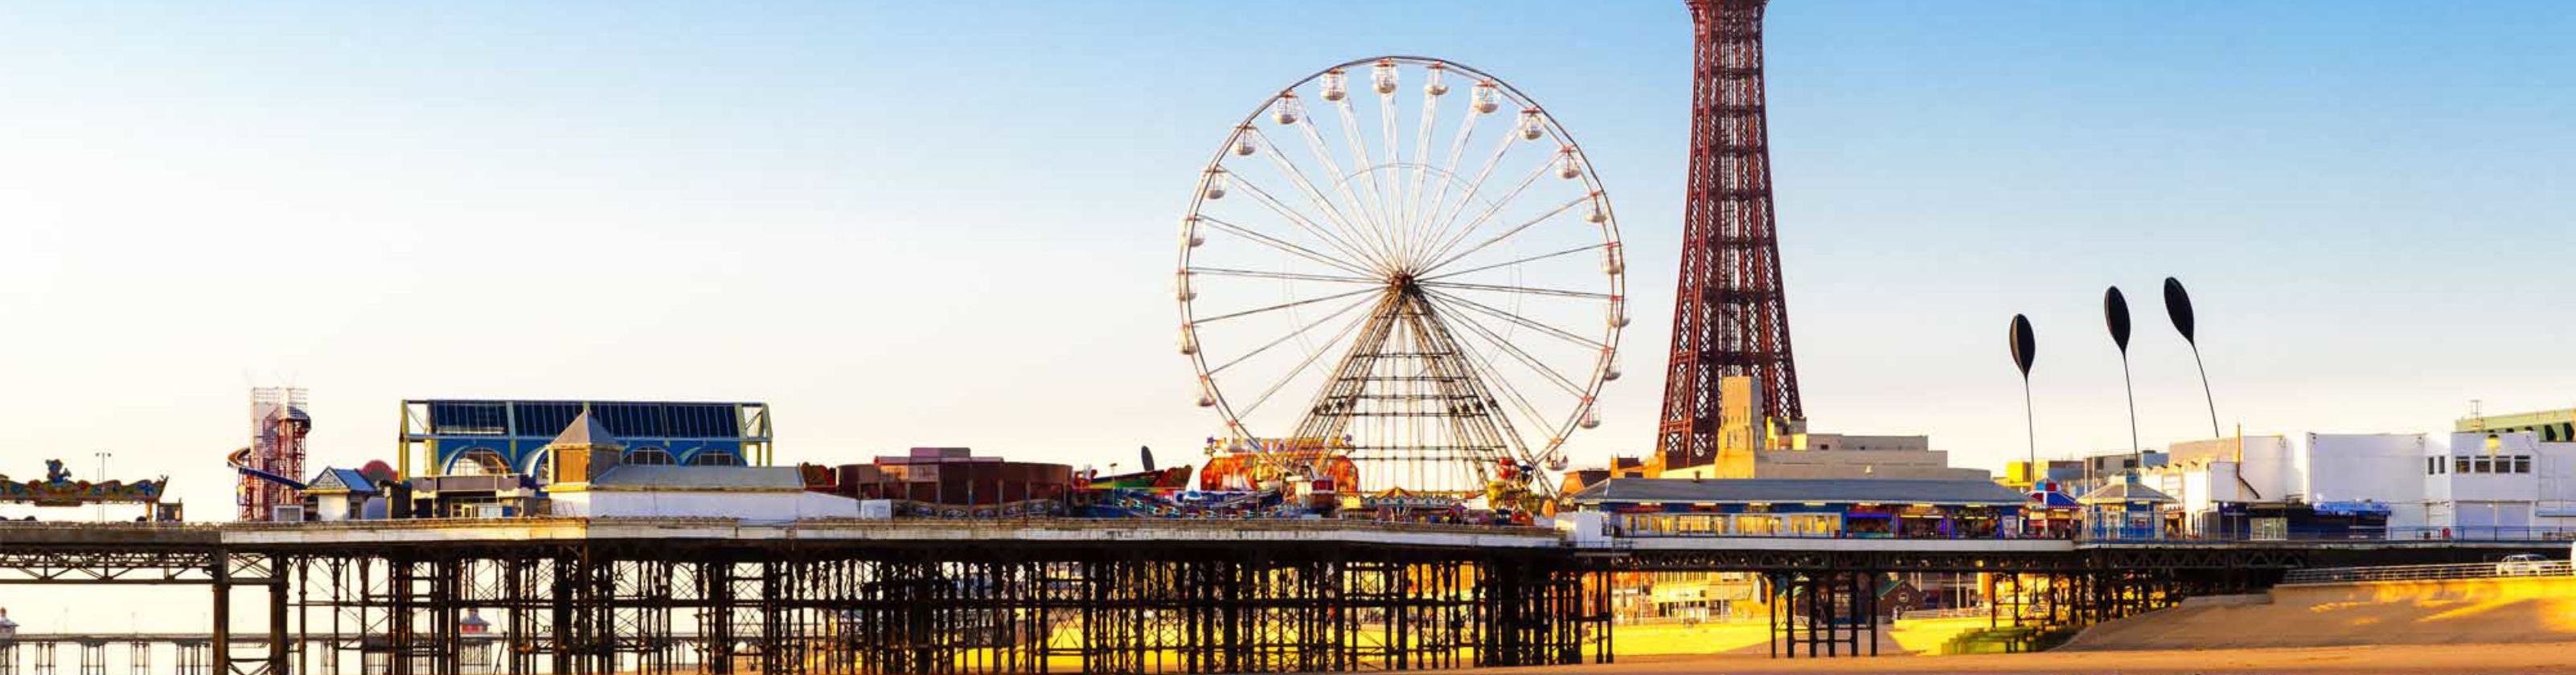 Corporate Events in Blackpool